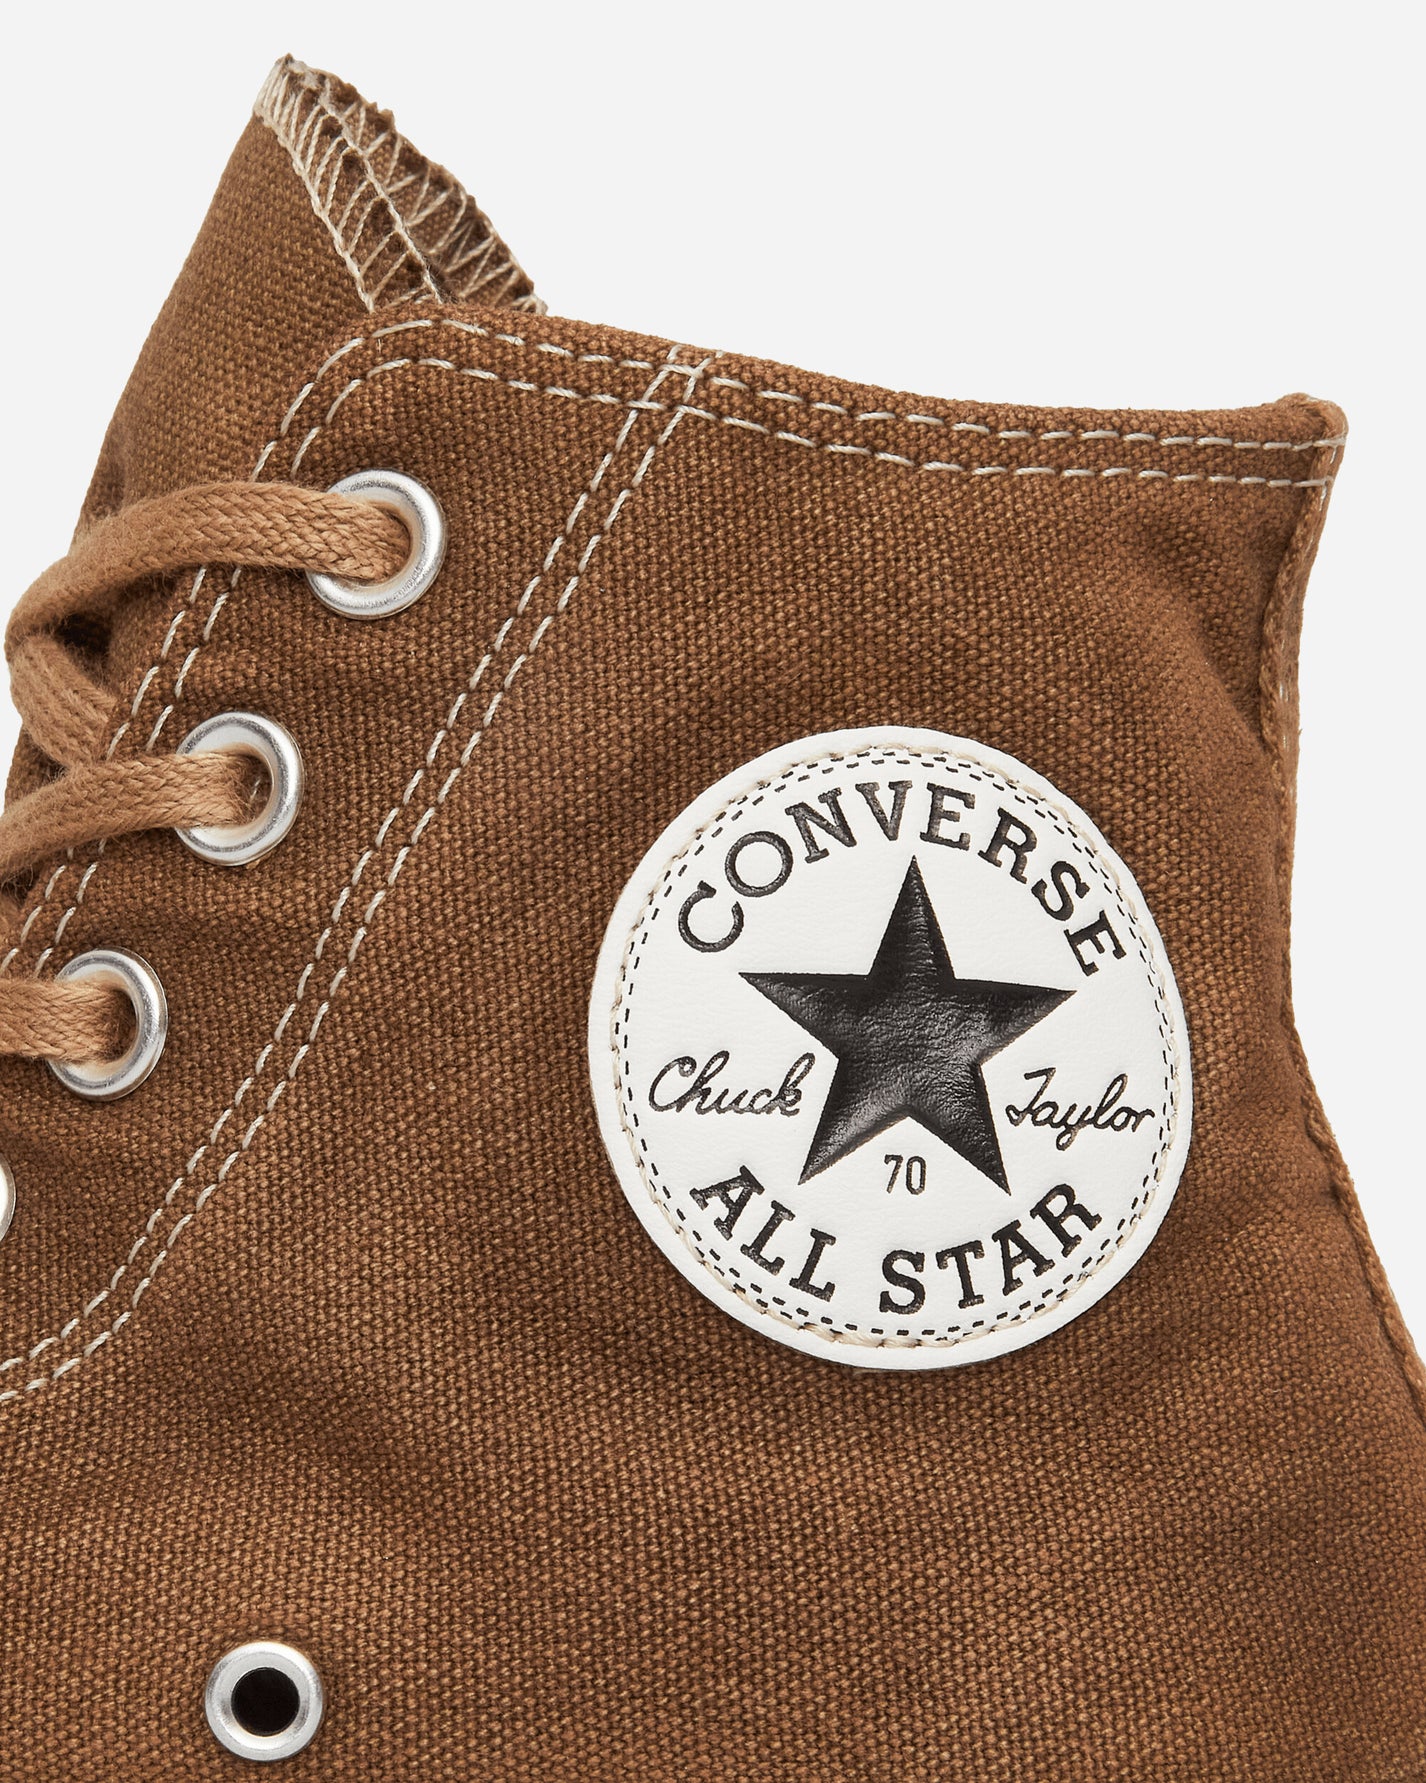 Converse Ct70 Canvas Ltd Icdc Walnut Dyed Sneakers High A06053C